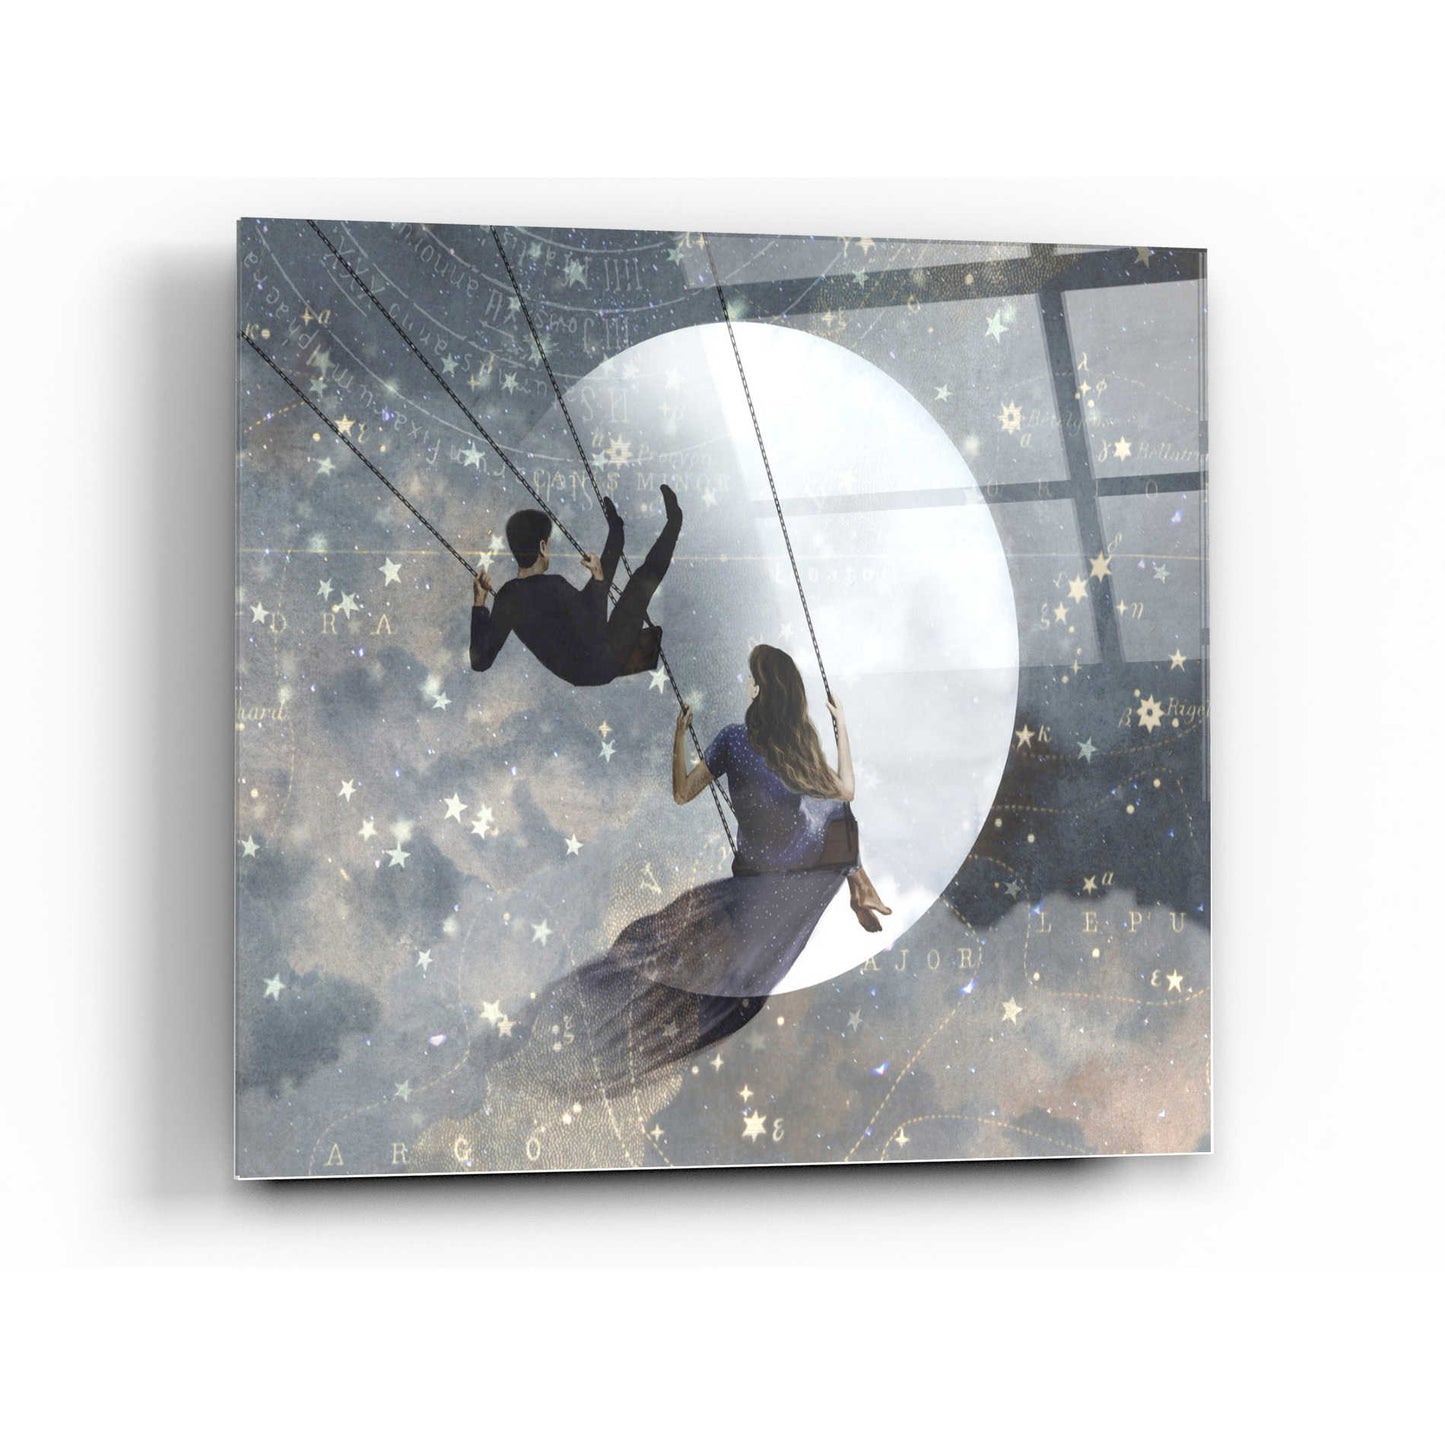 Epic Art 'Celestial Love II' by Victoria Borges Acrylic Glass Wall Art,24x24